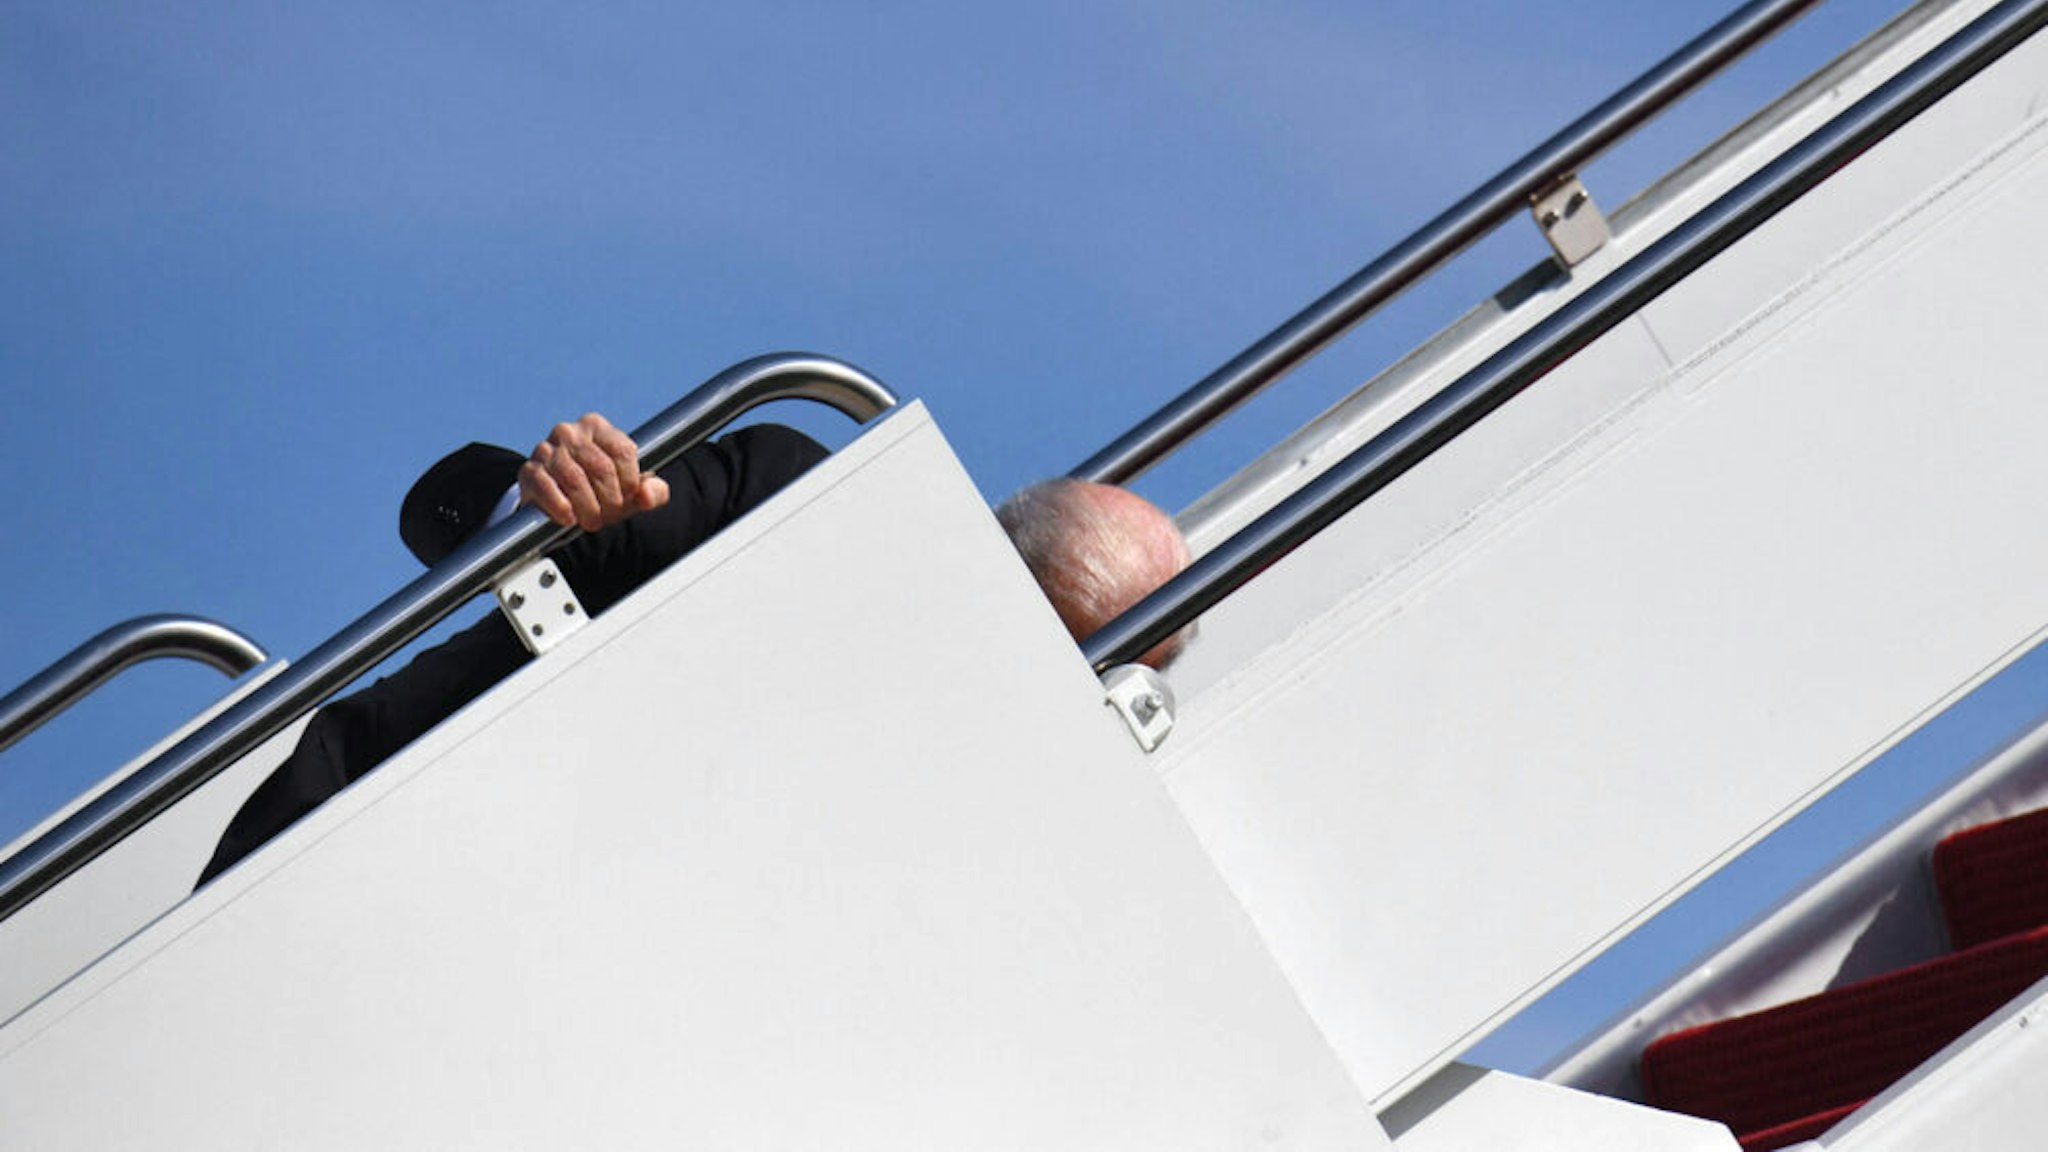 TOPSHOT - US President Joe Biden trips as he boards Air Force One at Joint Base Andrews in Maryland on March 18, 2021. - President Biden travels to Atlanta, Georgia, to tour the Centers for Disease Control and Prevention, and to meet with Georgia Asian American leaders, following the Atlanta Spa shootings.